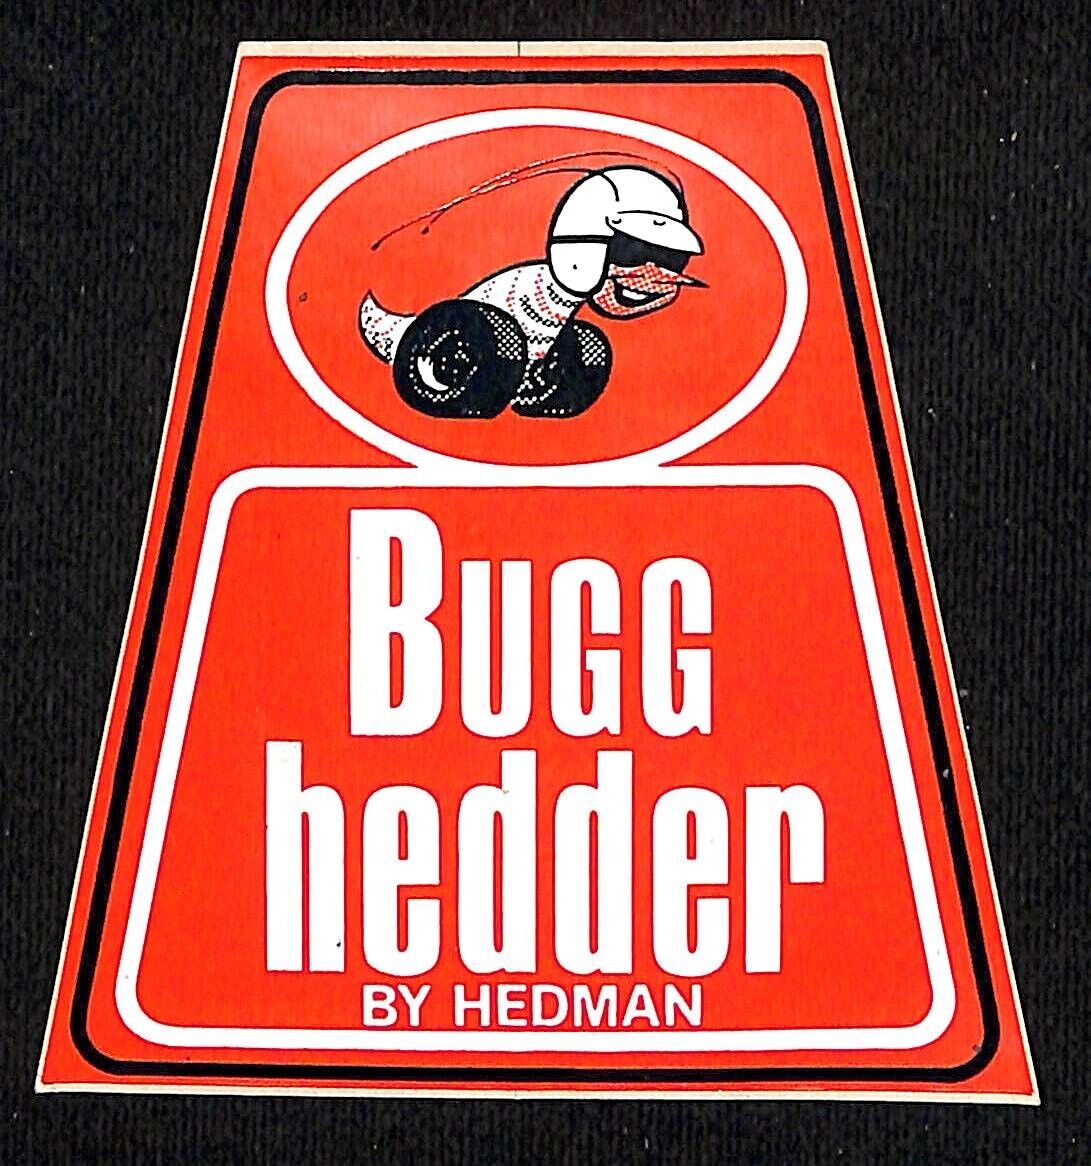 Bugg Hedder by Hedman Racing Auto Sticker c1970 - 3